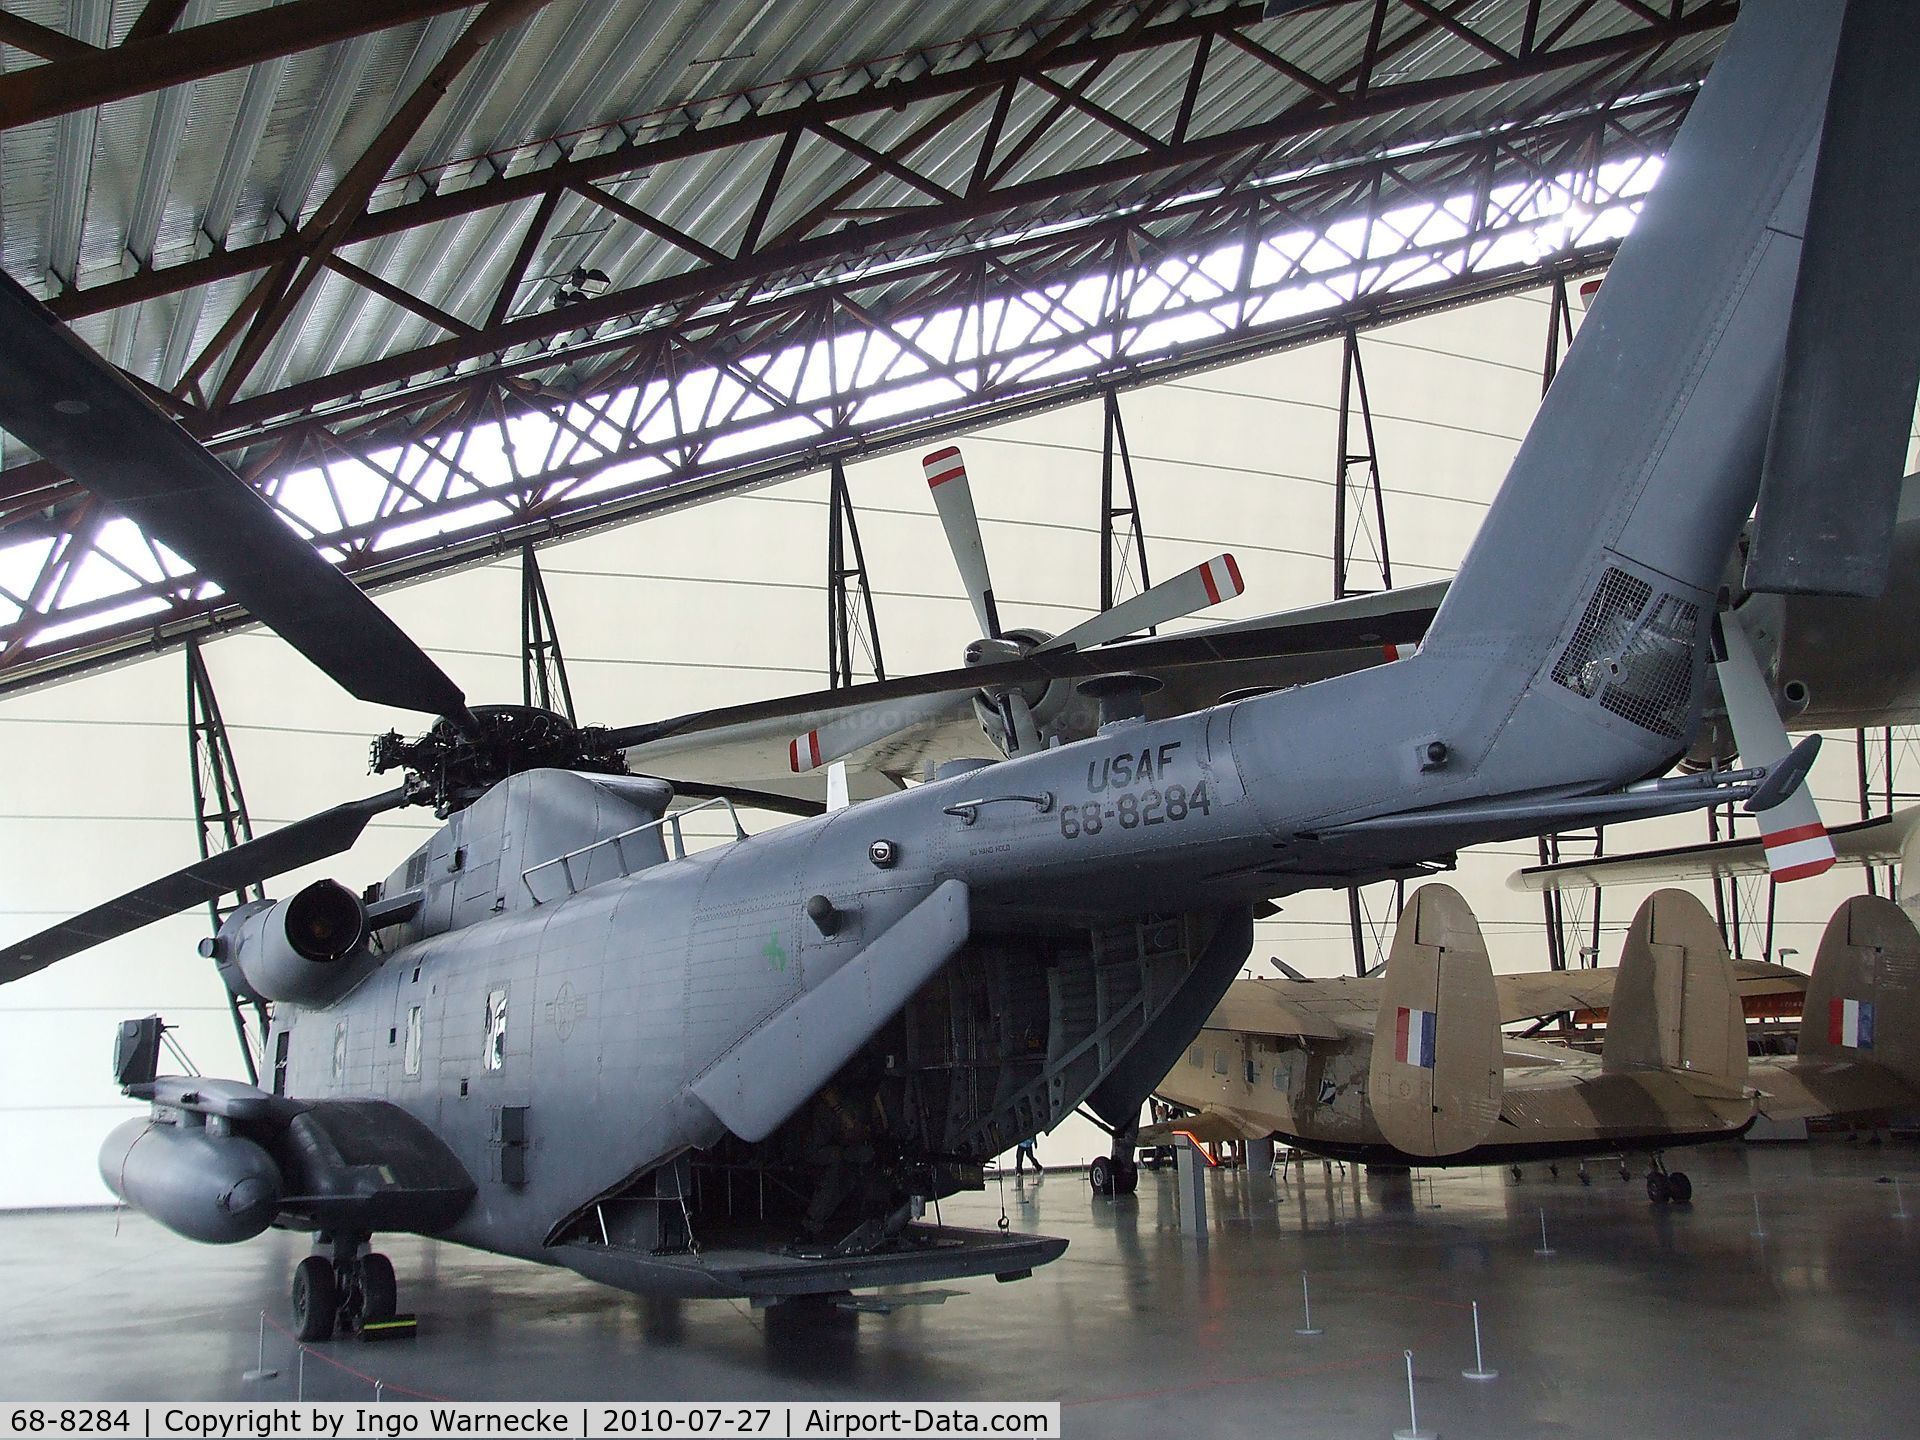 68-8284, 1968 Sikorsky MH-53M Pave Low IV C/N 65-131, Sikorsky MH-53M at the RAF Museum, Cosford